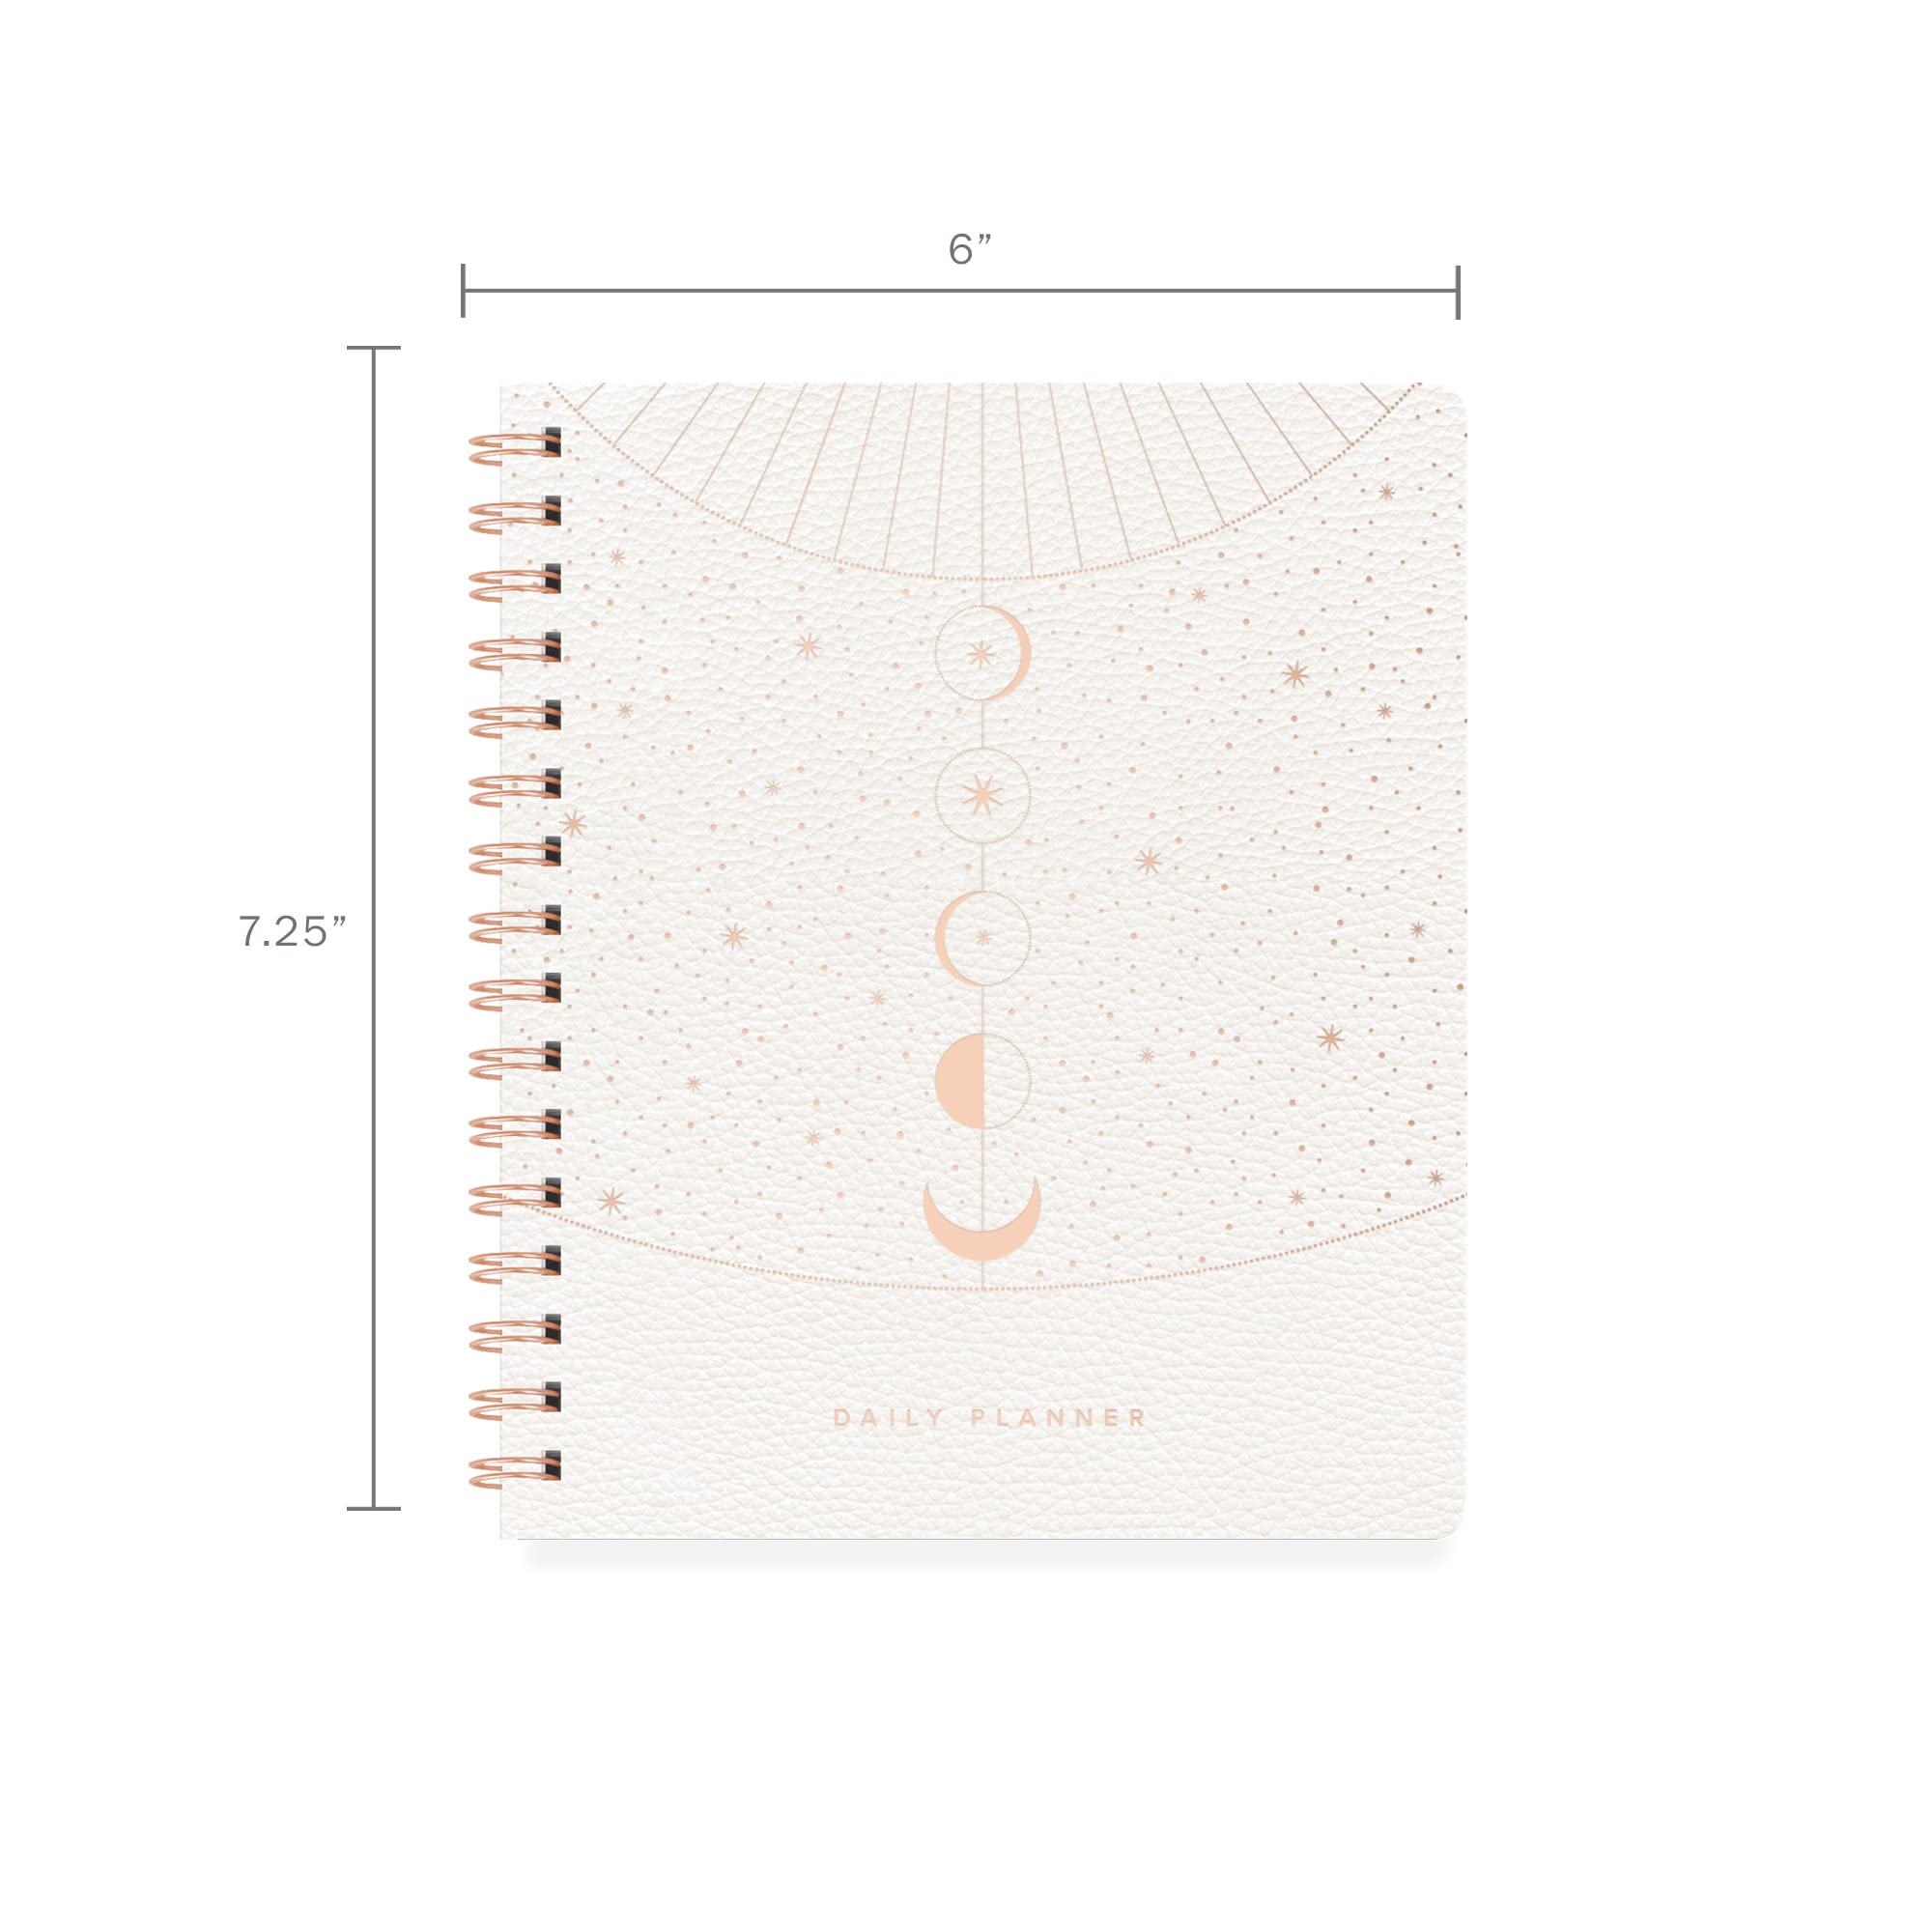 Fringe Studio Non-Dated Daily Planner, Faux Leather Cover, Moon Phase Dust", 160 Pages, 6" x 7.25" (877006)